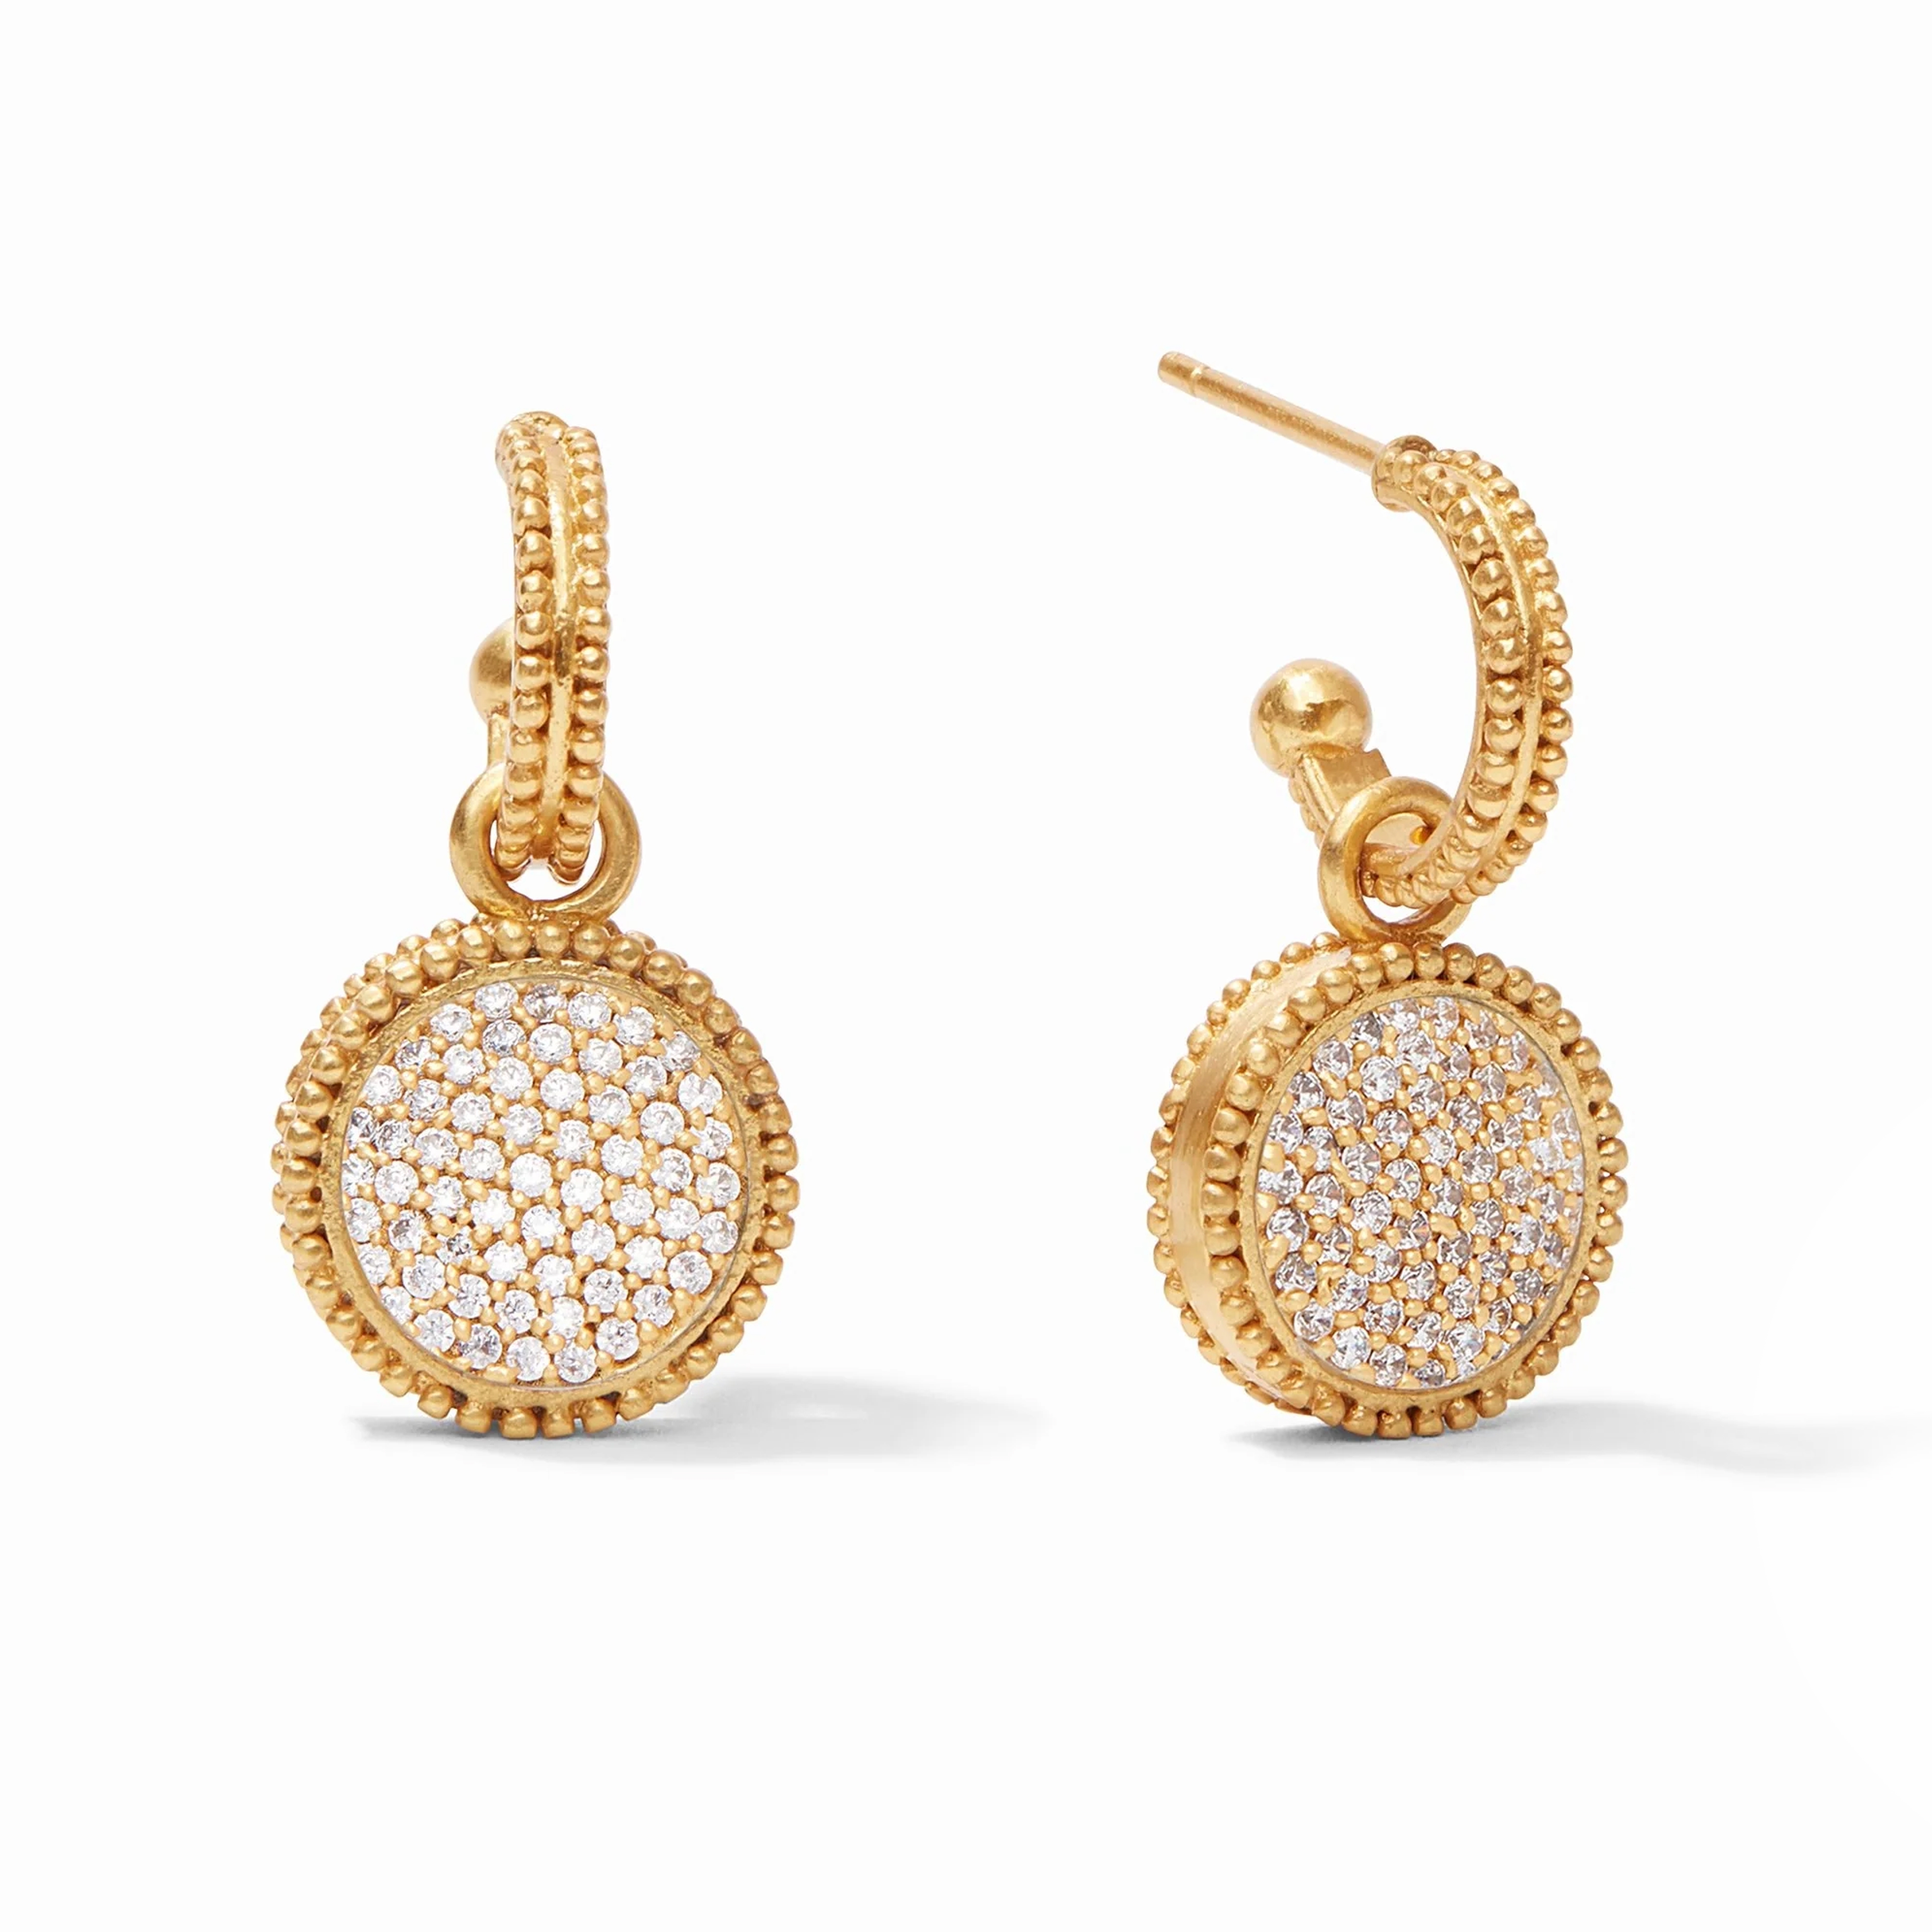 Yellow Gold Plate Pave Cubic Zirconia Gemstone Earrings Isolated on White. | Source: Shutterstock